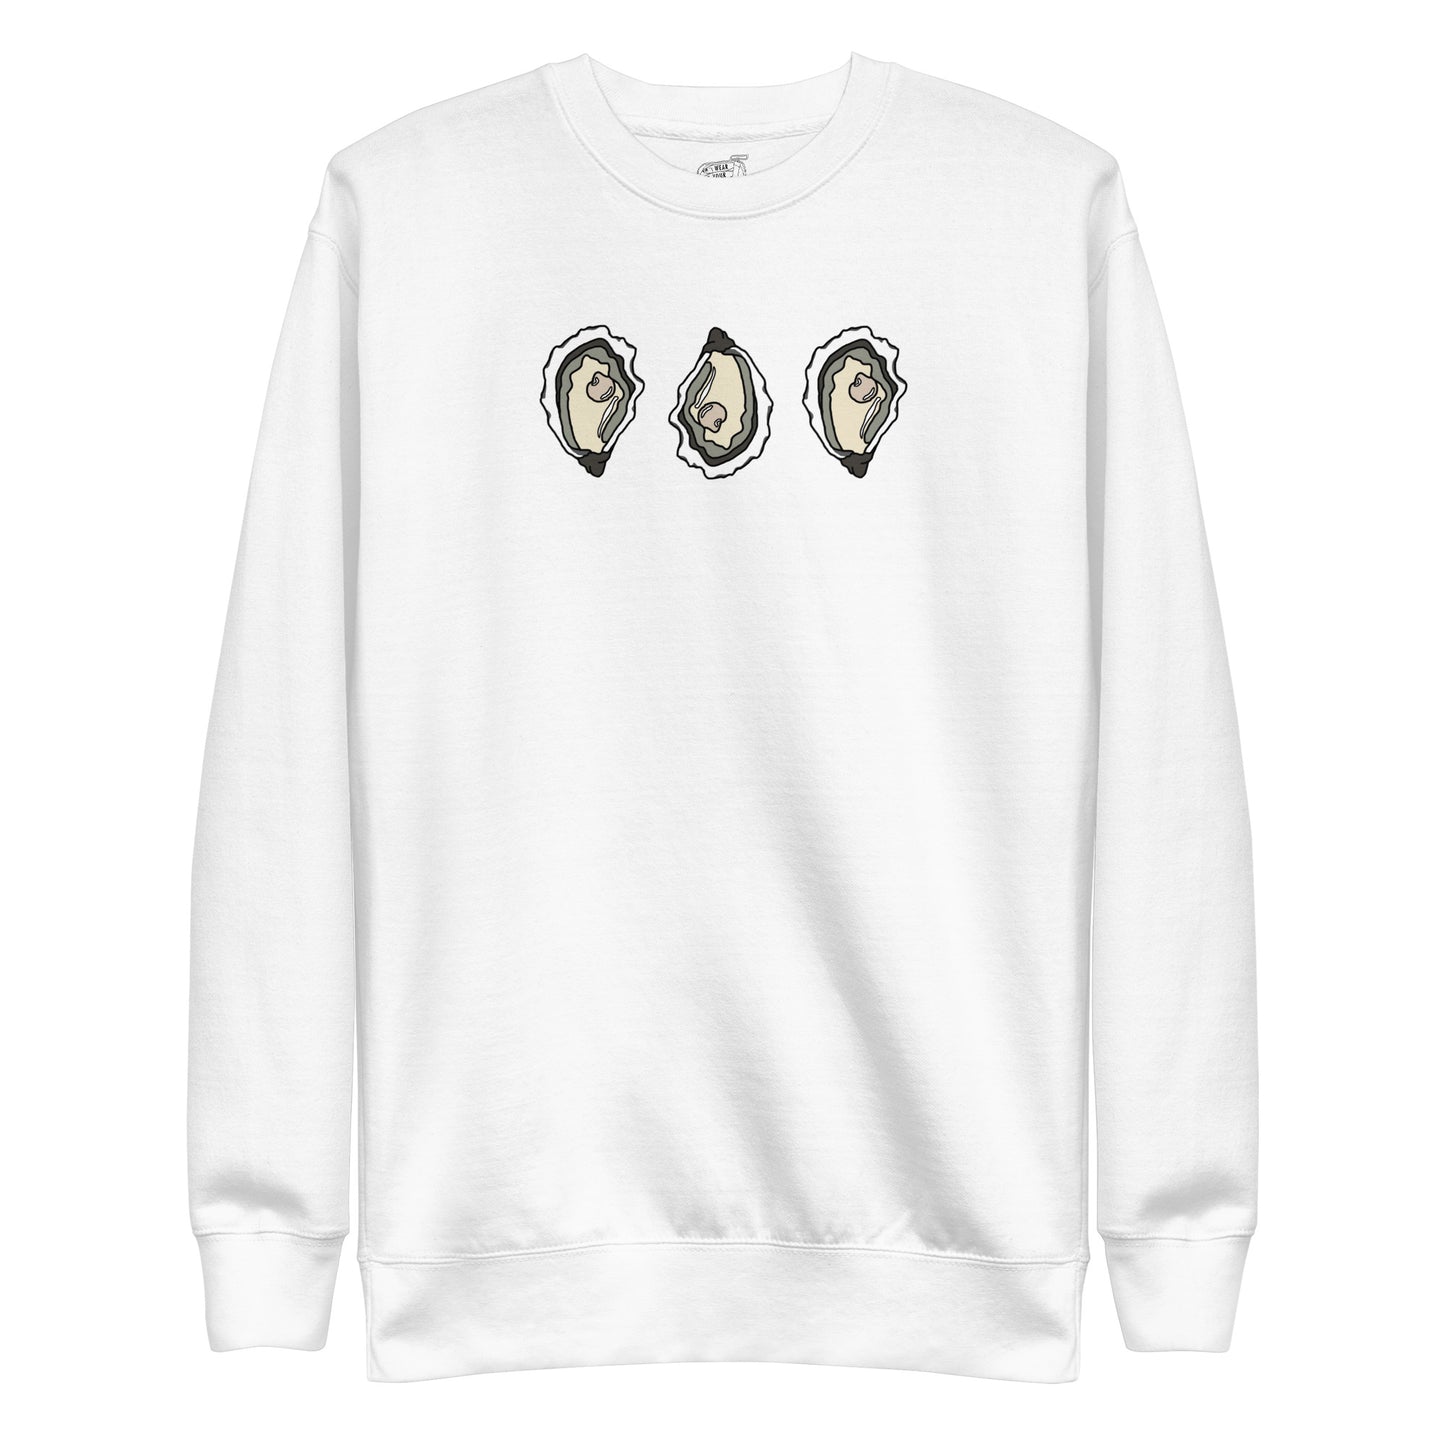 The World is Your Oyster Sweatshirt